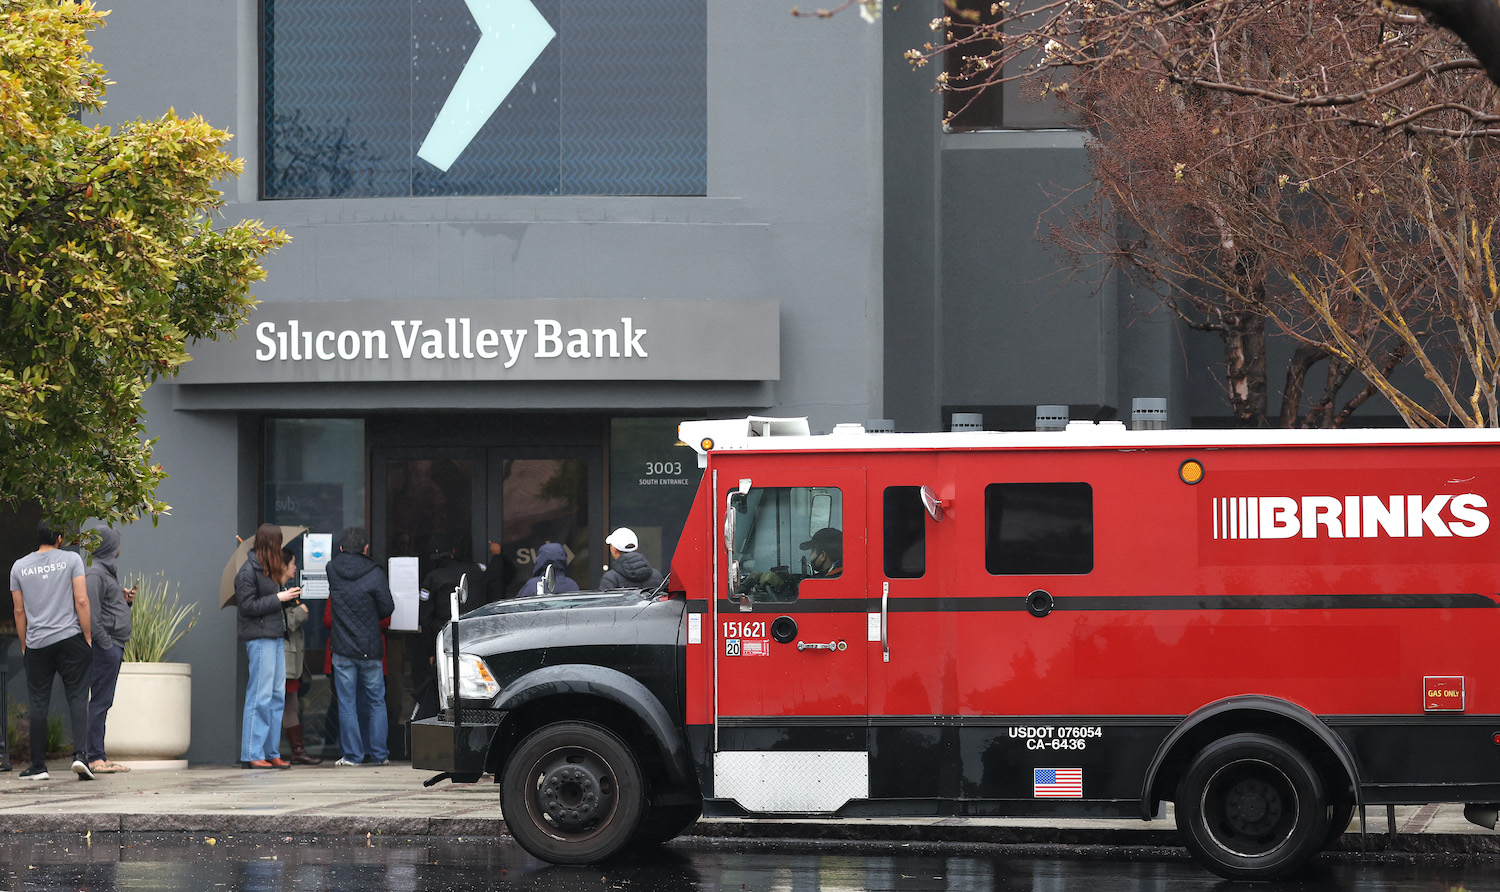 SANTA CLARA, CALIFORNIA - MARCH 10: A Brinks armored truck sits parked in front of the shuttered Silicon Valley Bank (SVB) headquarters on March 10, 2023 in Santa Clara, California. Silicon Valley Bank was shut down on Friday morning by California regulators and was put in control of the U.S. Federal Deposit Insurance Corporation. Prior to being shut down by regulators, shares of SVB were halted Friday morning after falling more than 60% in premarket trading following a 60% declined on Thursday when the bank sold off a portfolio of US Treasuries and $1.75 billion in shares to cover declining customer deposits. (Photo by Justin Sullivan/Getty Images)